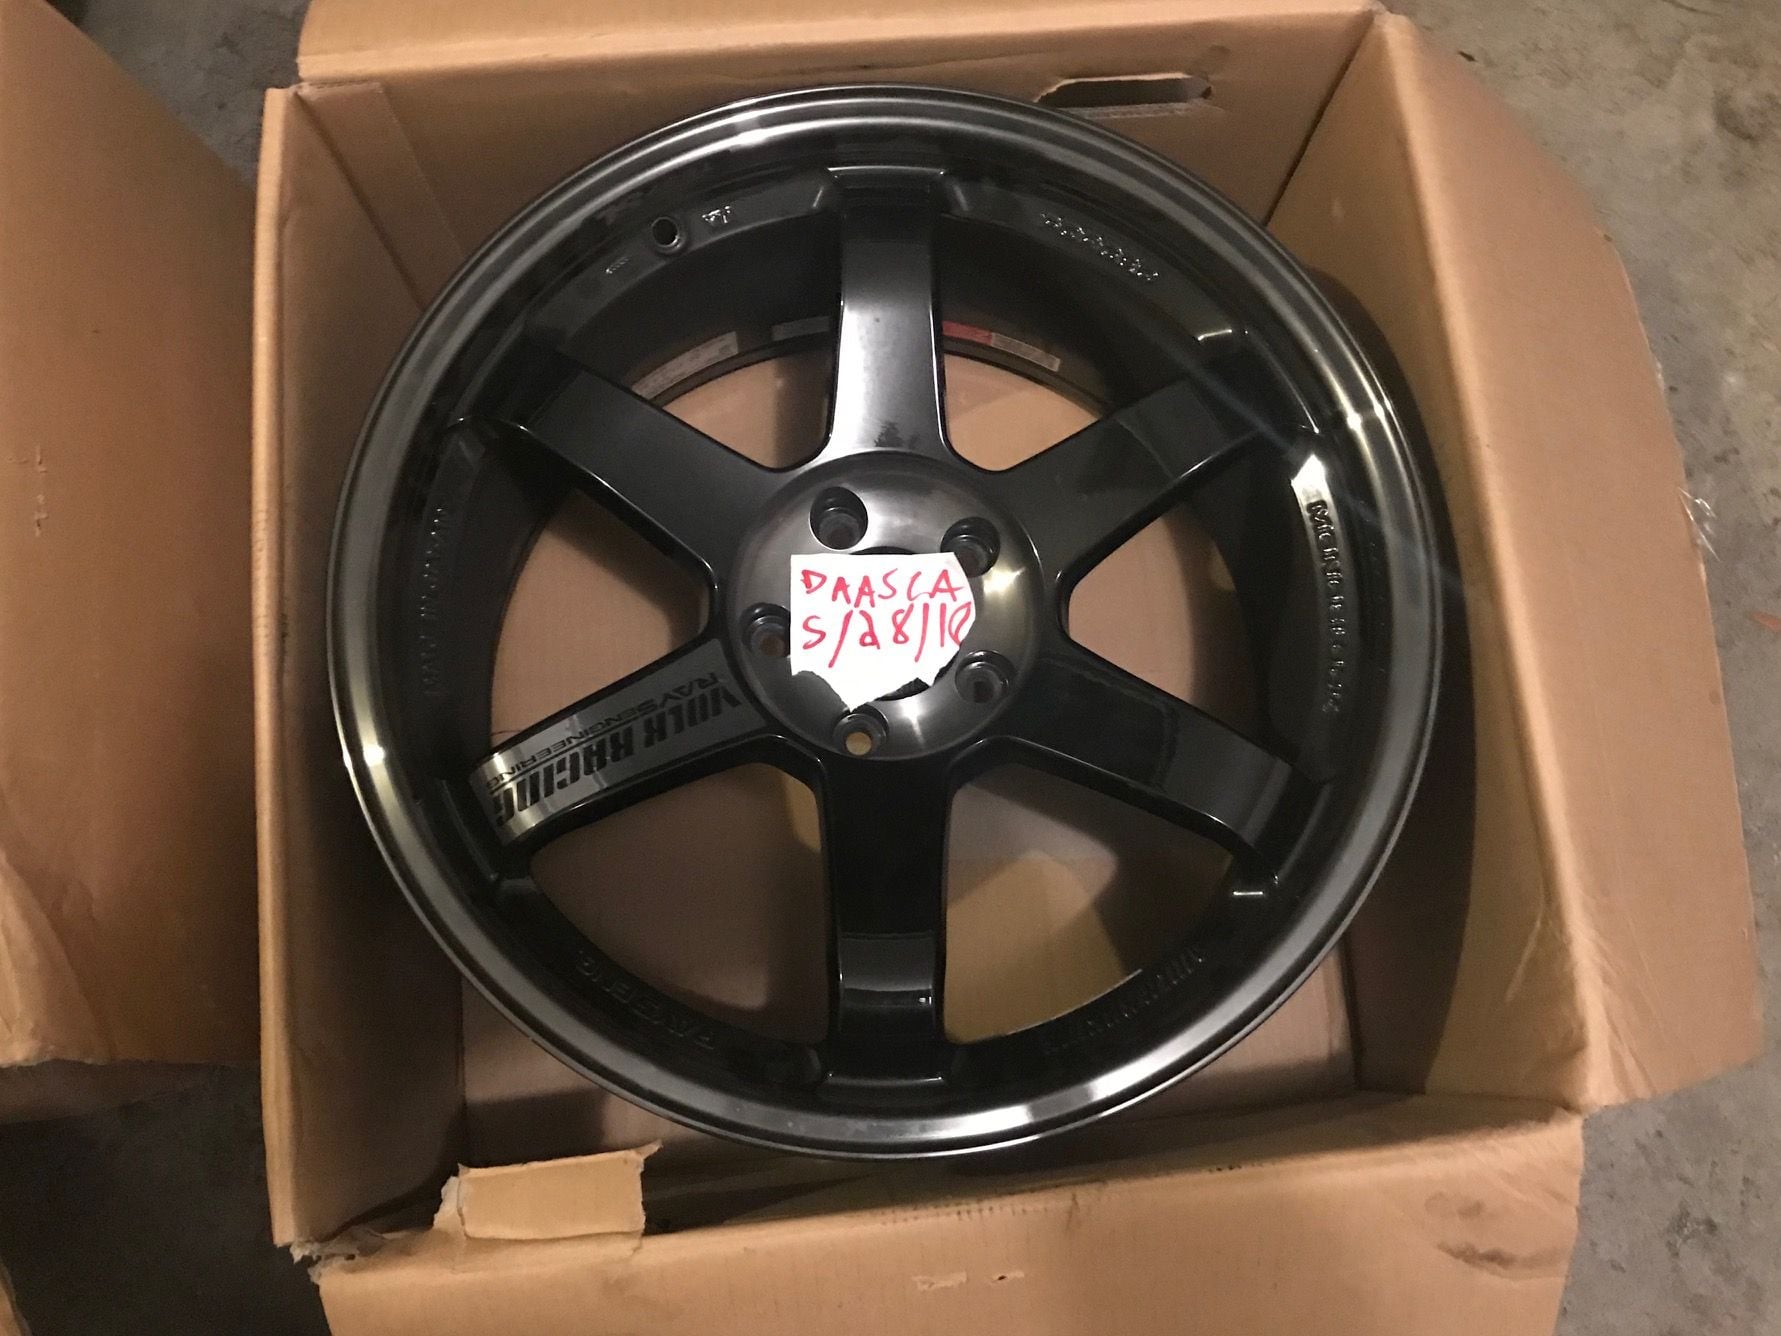 Wheels and Tires/Axles - Volk TE37SL Double Pressed Black, 18x9.5 +22, 500 miles - Used - 2008 to 2015 Mitsubishi Lancer Evolution - Pace, FL 32571, United States